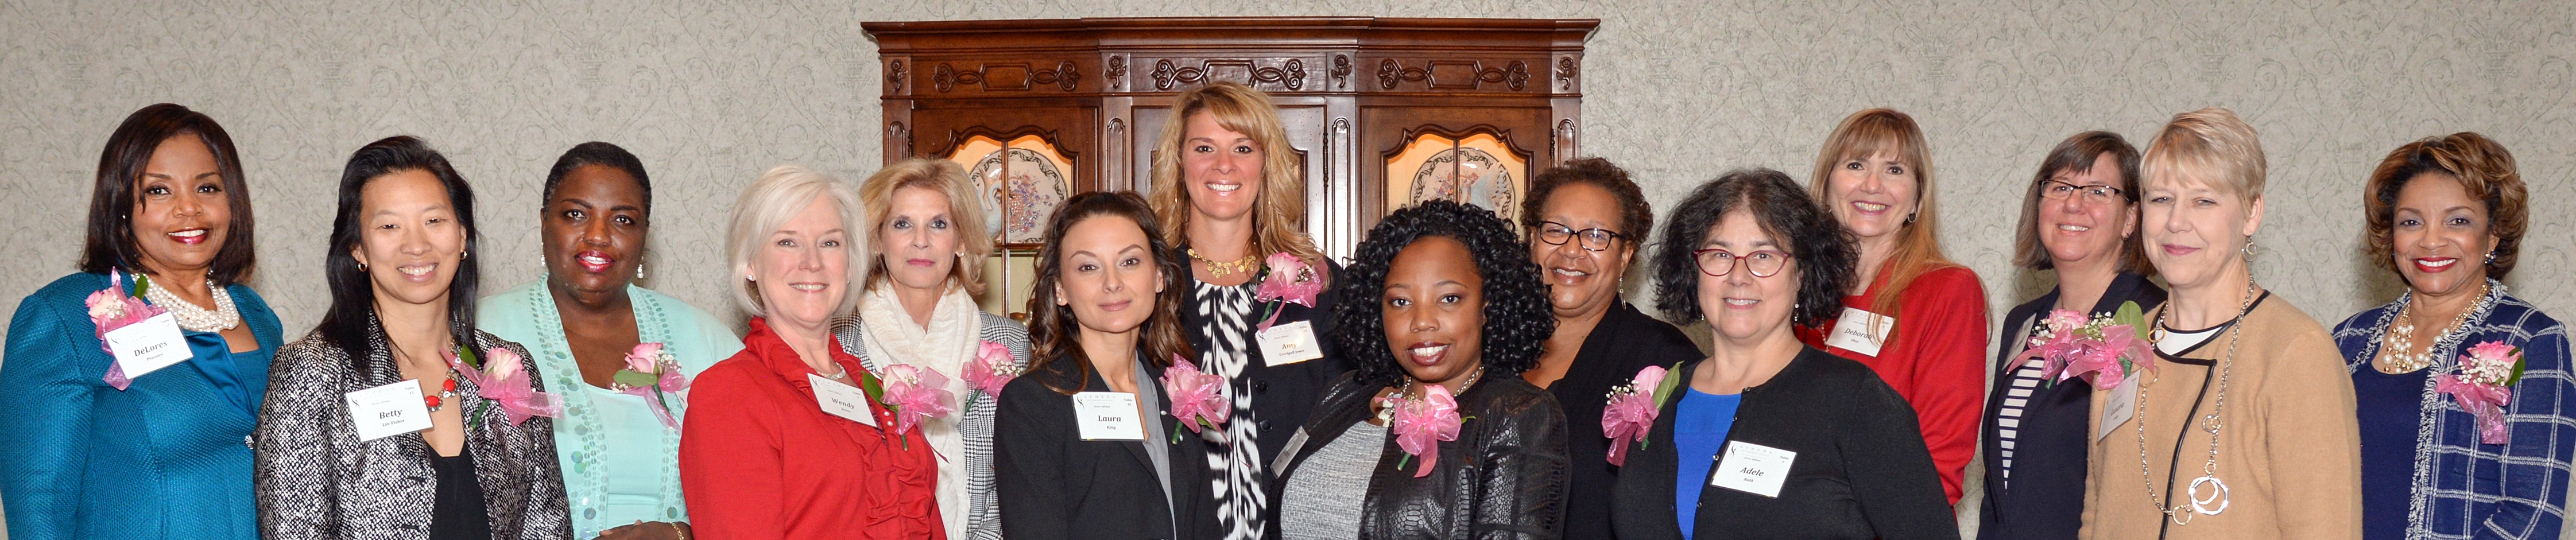 ATHENA Akron Honorary Chairs at the 2016 Women's Leadership Day Luncheon Celebration